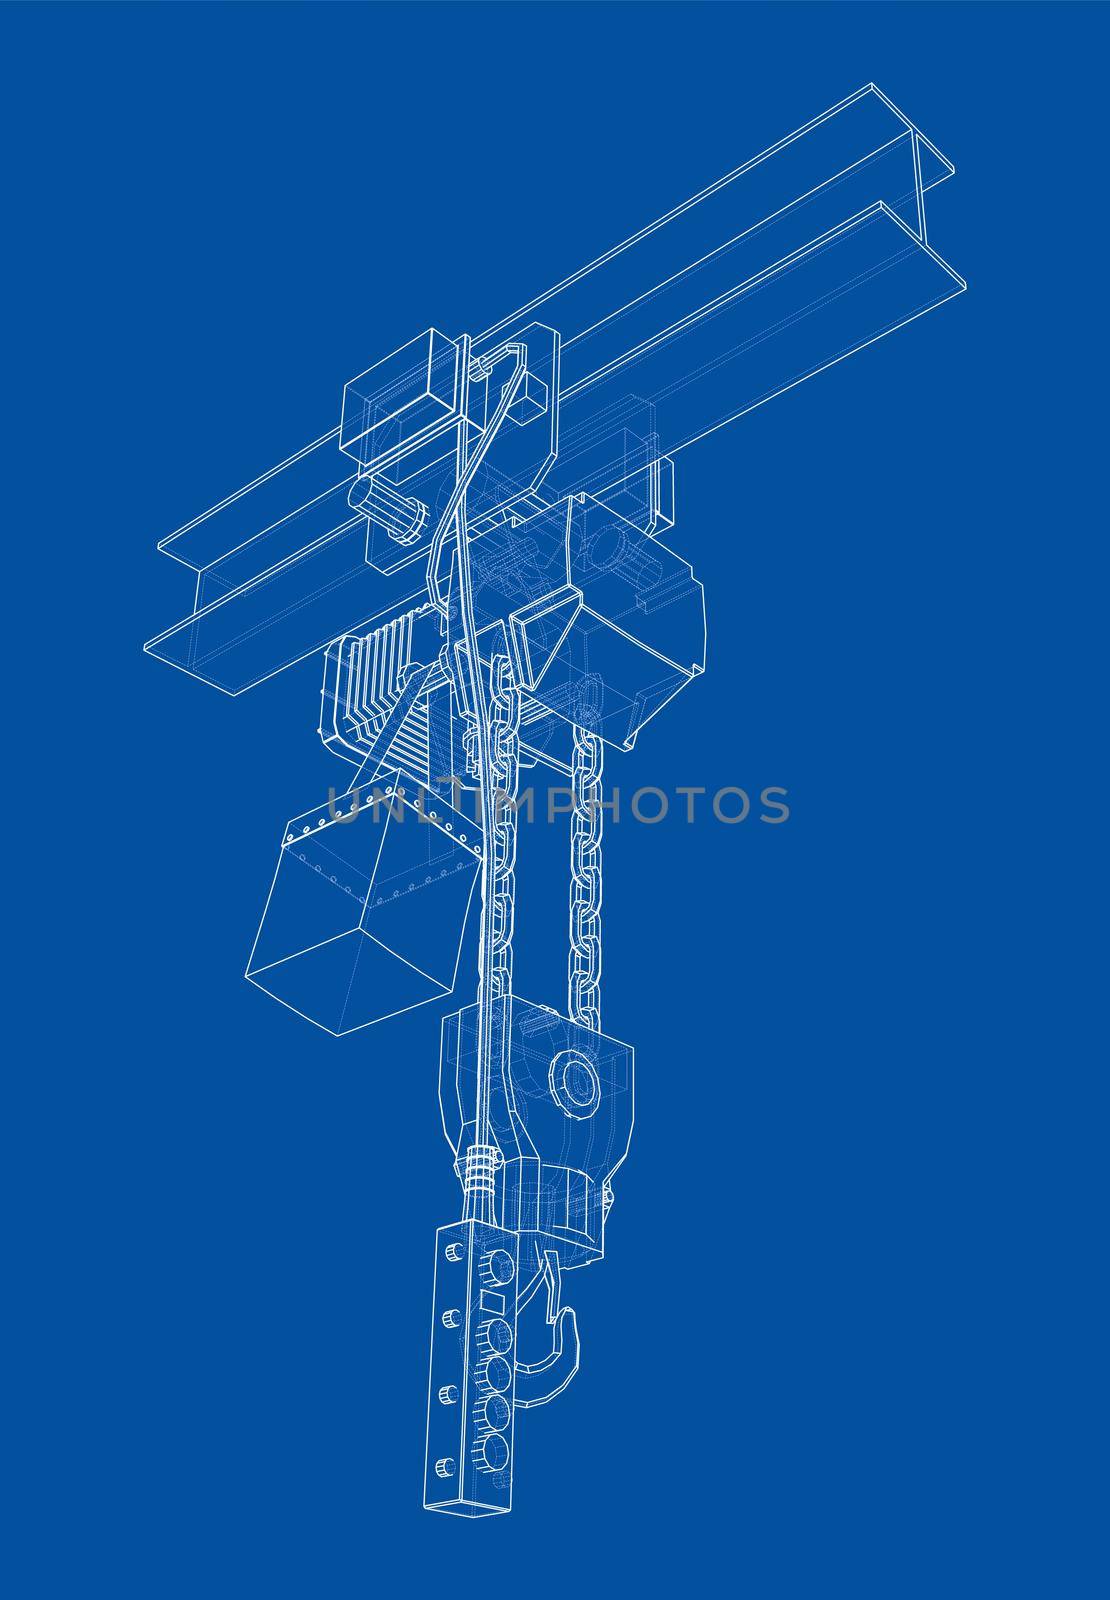 Winch or lifting machine concept outline. 3d illustration. Wire-frame style